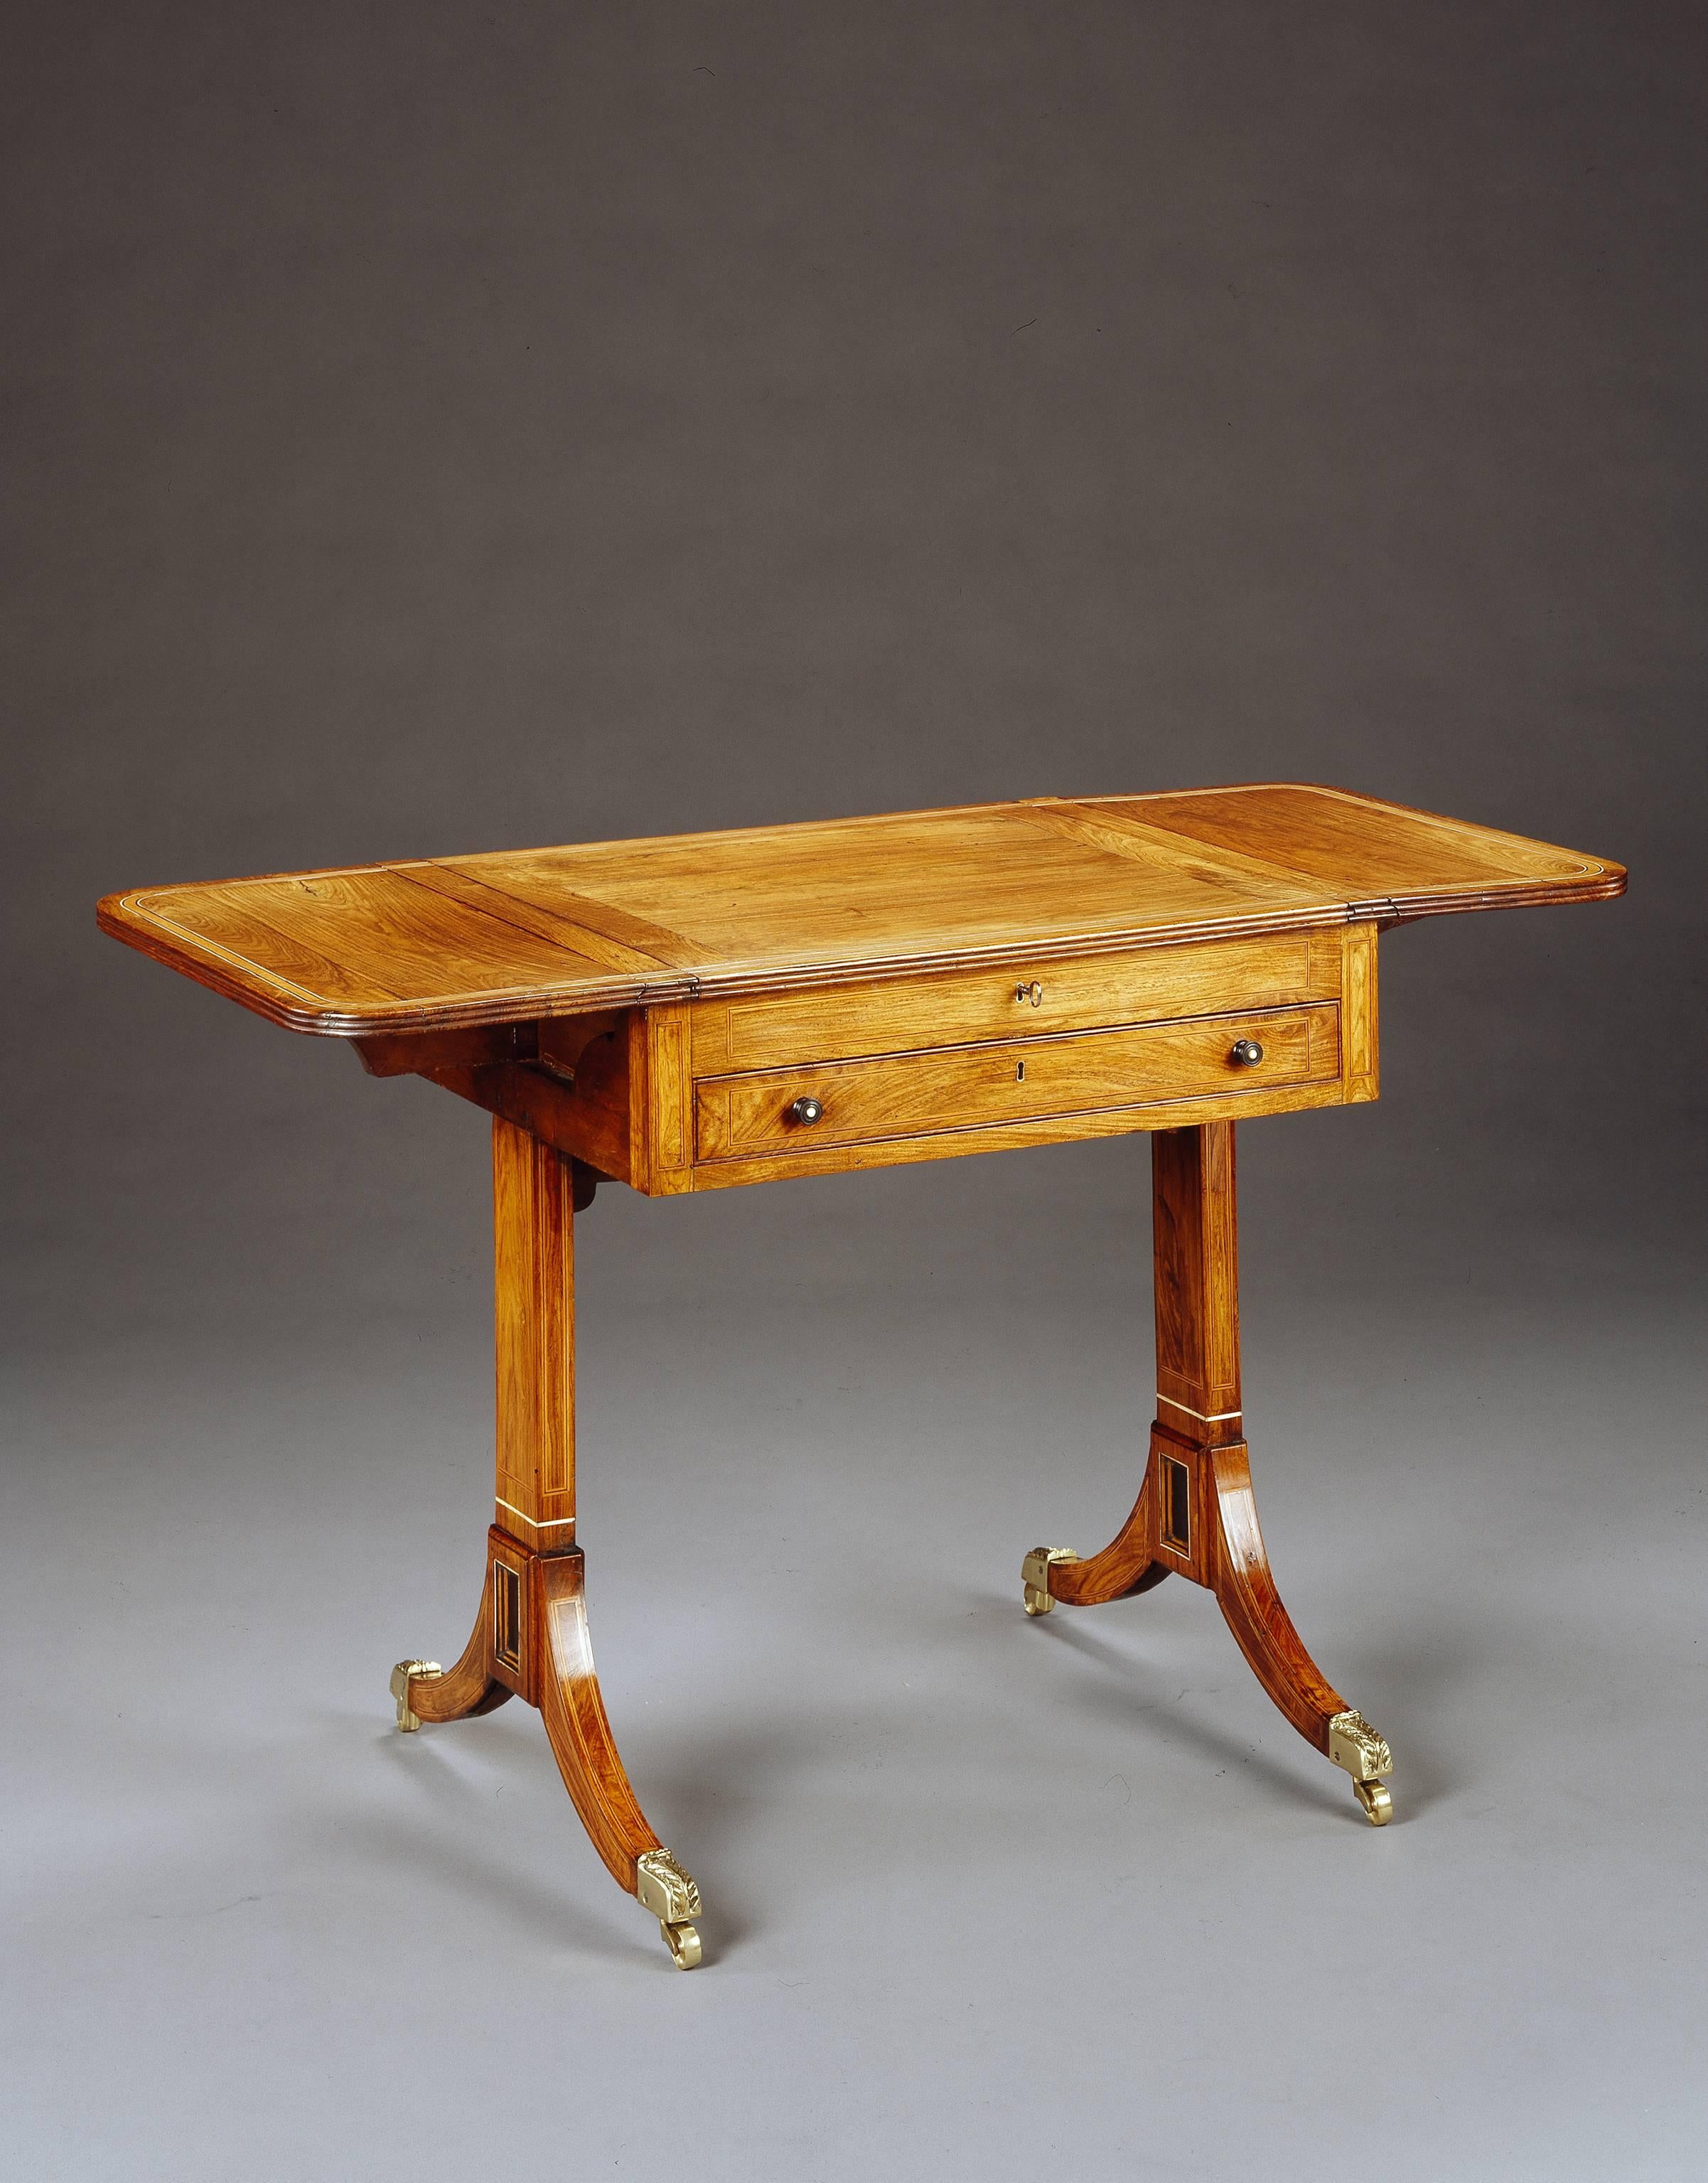 An early 19th century Anglo-Indian padouk games table, the rectangular top with rounded corners and a satinwood border, the removable central section between two flaps and with a chess board on the reverse, enclosing a removable inlaid backgammon